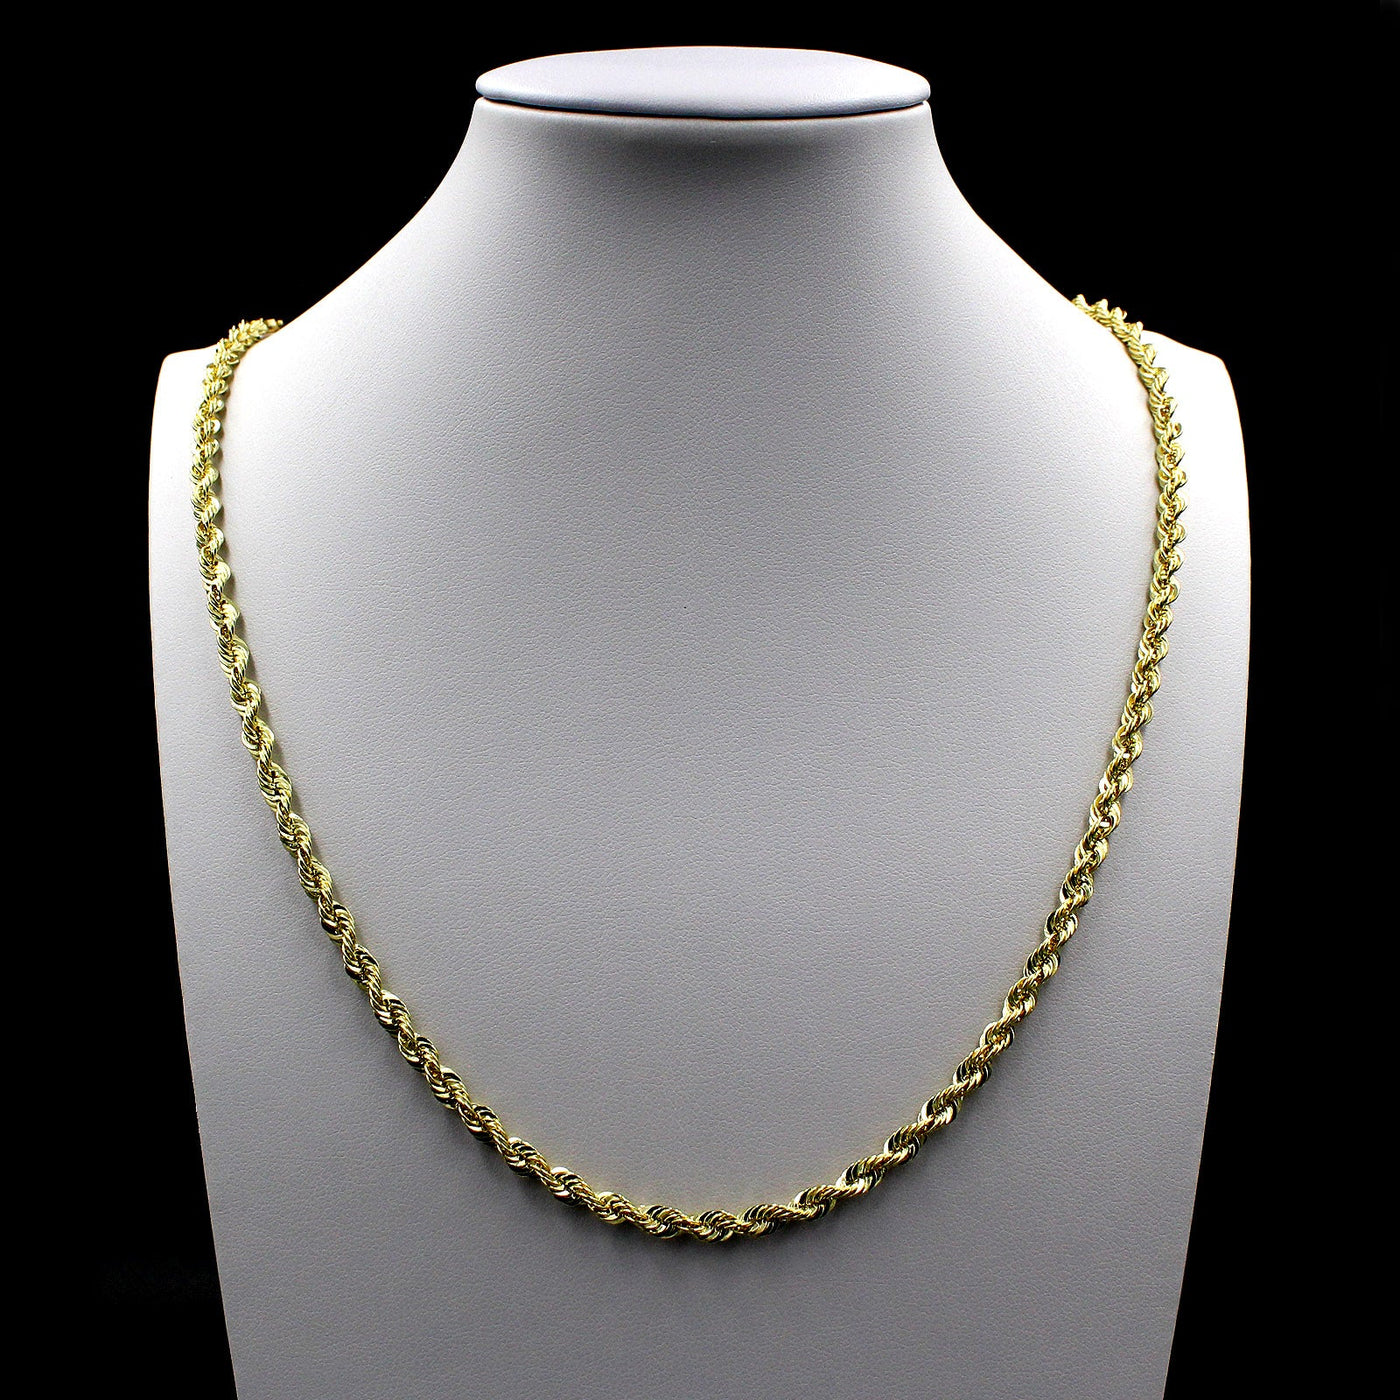 5mm Miami Cuban Chain Rope Necklace 16 18 20 24 28